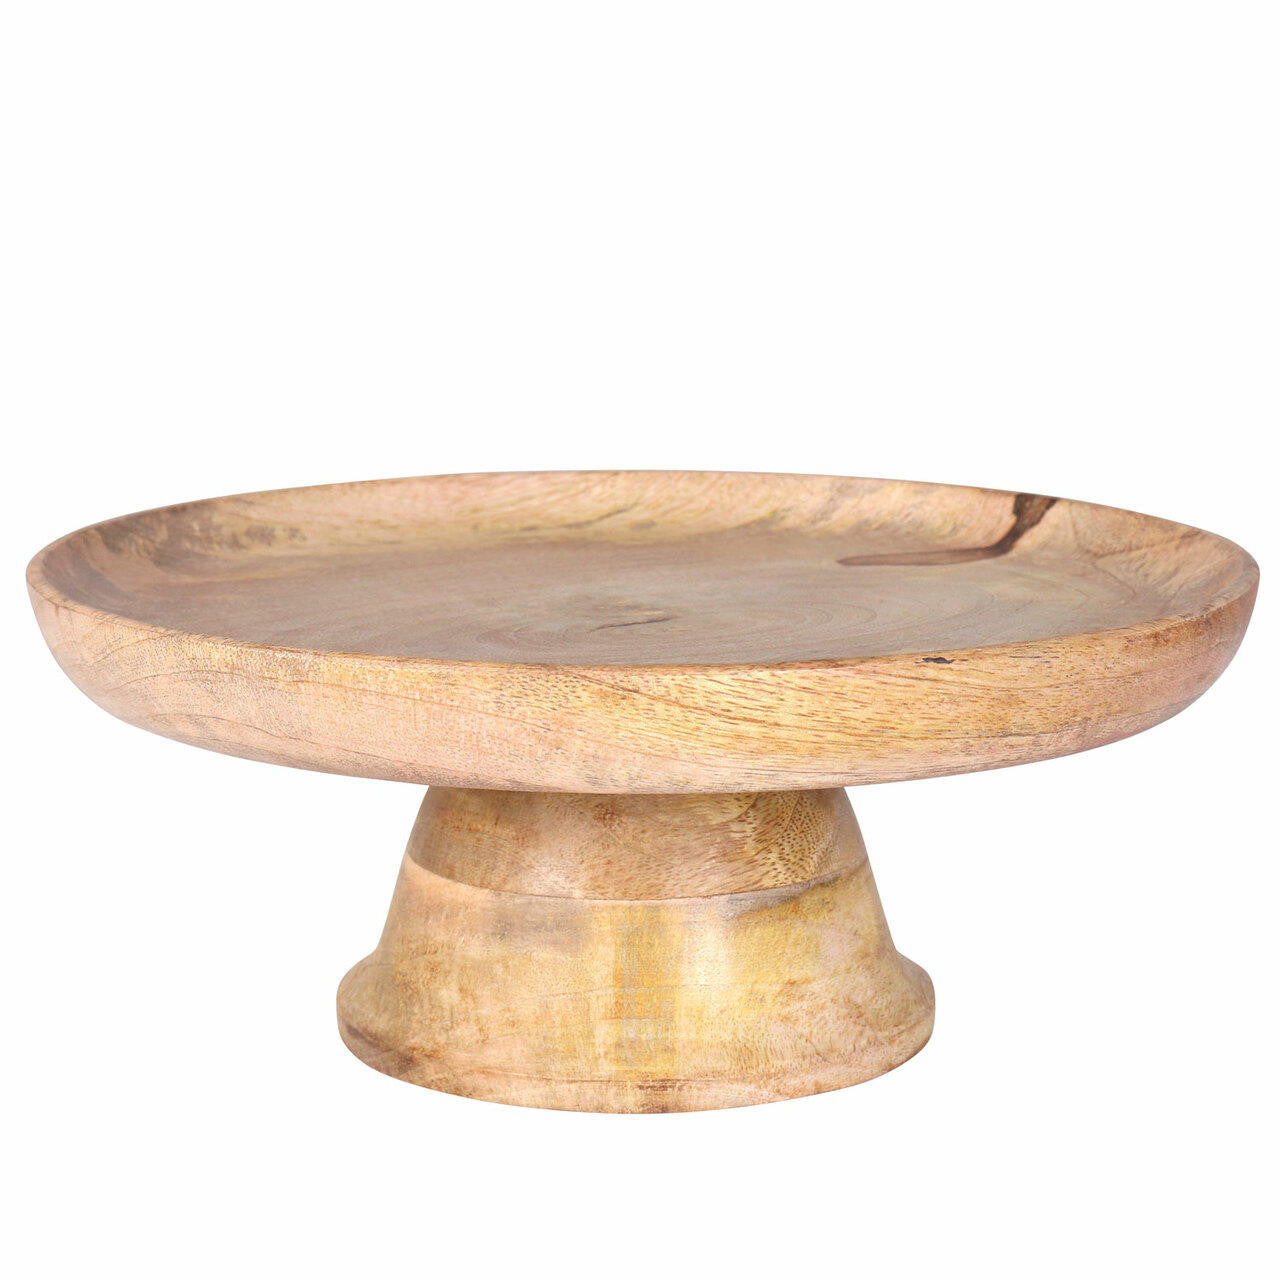 Buy Gold Mango Wood Cake Stand Online at Best Price in India